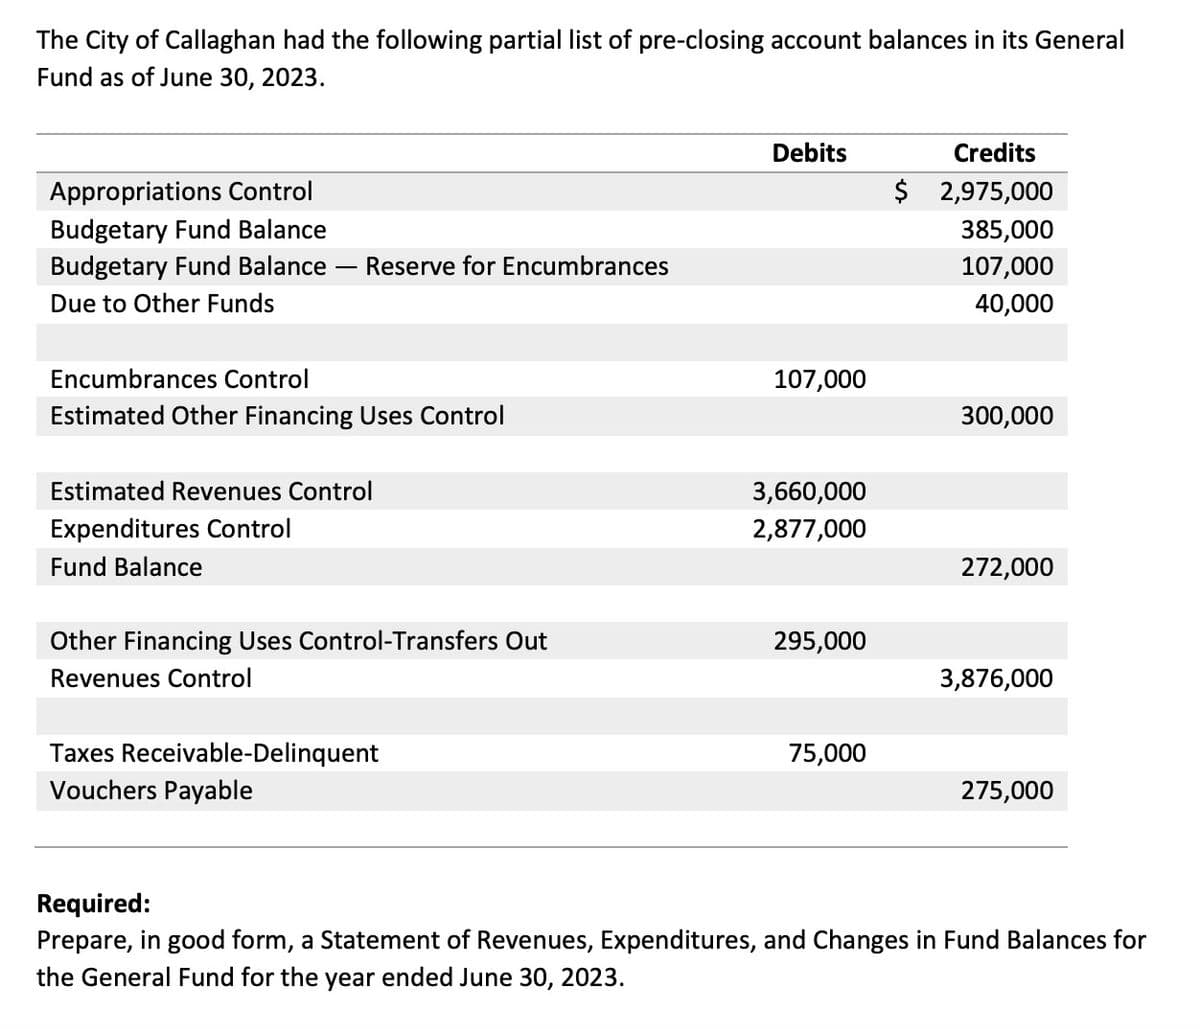 The City of Callaghan had the following partial list of pre-closing account balances in its General
Fund as of June 30, 2023.
Appropriations Control
Budgetary Fund Balance
Budgetary Fund Balance
Due to Other Funds
Reserve for Encumbrances
Encumbrances Control
Estimated Other Financing Uses Control
Estimated Revenues Control
Expenditures Control
Fund Balance
Other Financing Uses Control-Transfers Out
Revenues Control
Taxes Receivable-Delinquent
Vouchers Payable
Debits
107,000
3,660,000
2,877,000
295,000
75,000
Credits
$ 2,975,000
385,000
107,000
40,000
300,000
272,000
3,876,000
275,000
Required:
Prepare, in good form, a Statement of Revenues, Expenditures, and Changes in Fund Balances for
the General Fund for the year ended June 30, 2023.